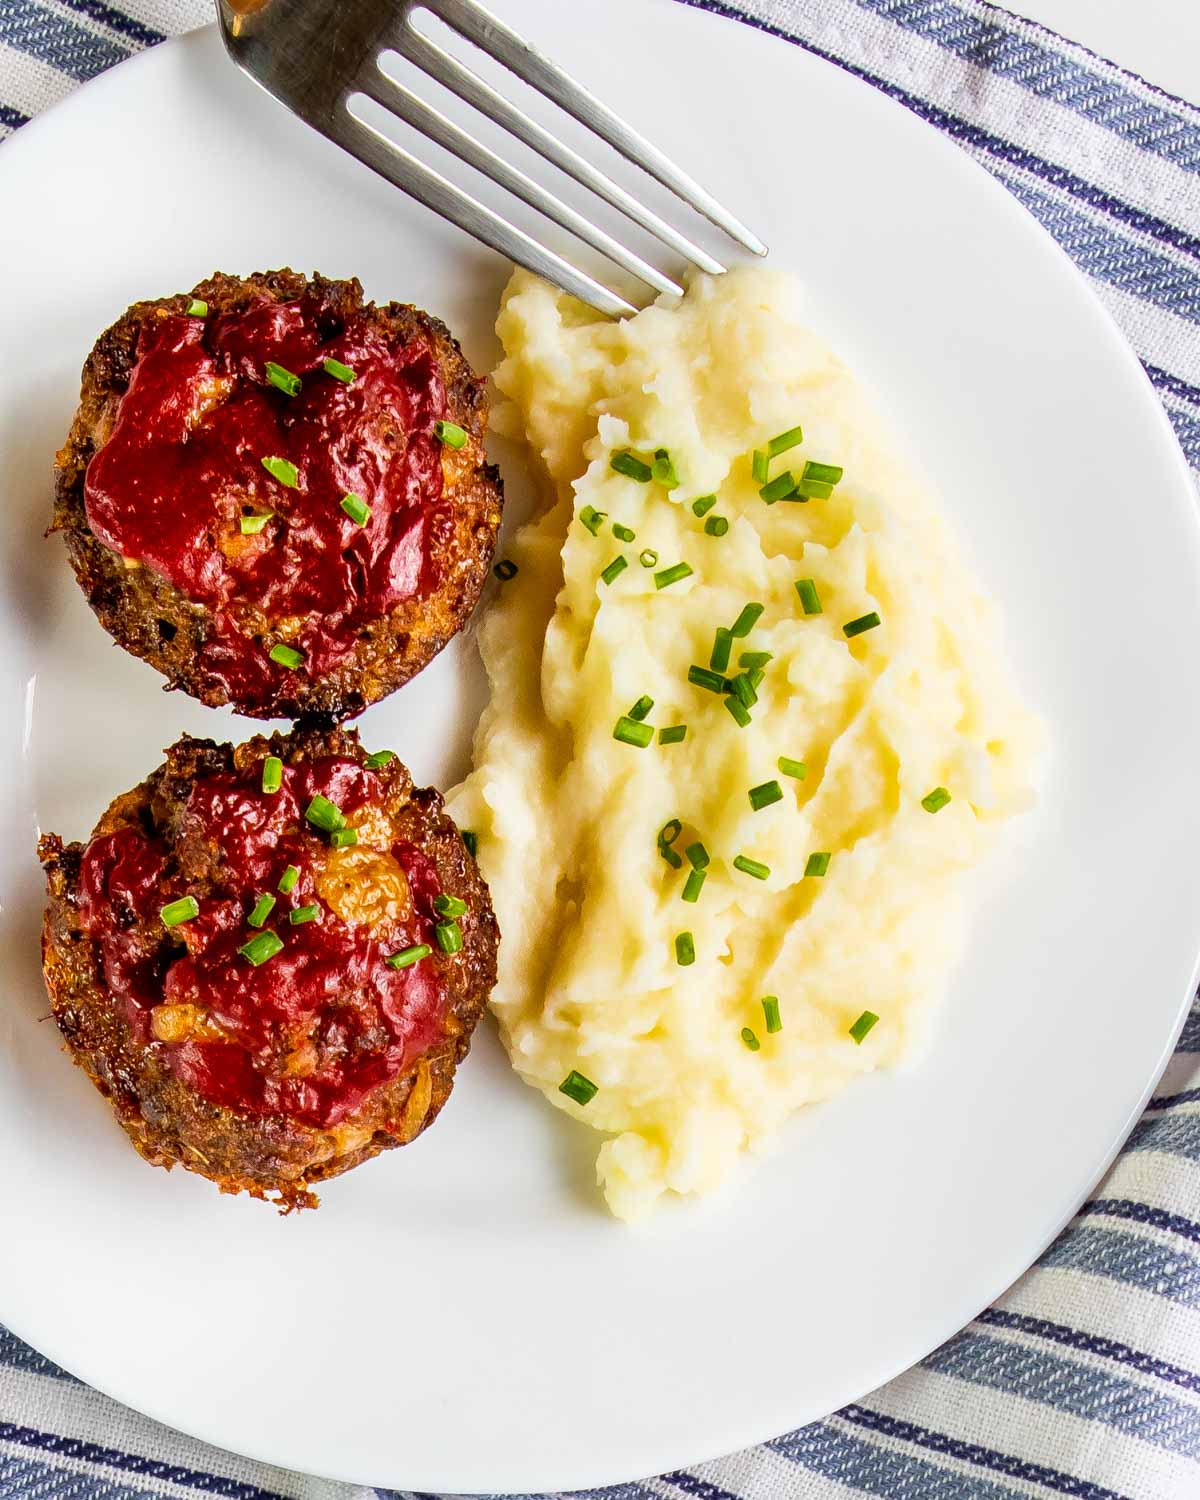 2 meatloaf muffins on a plate next to a side of mashed potatoes.